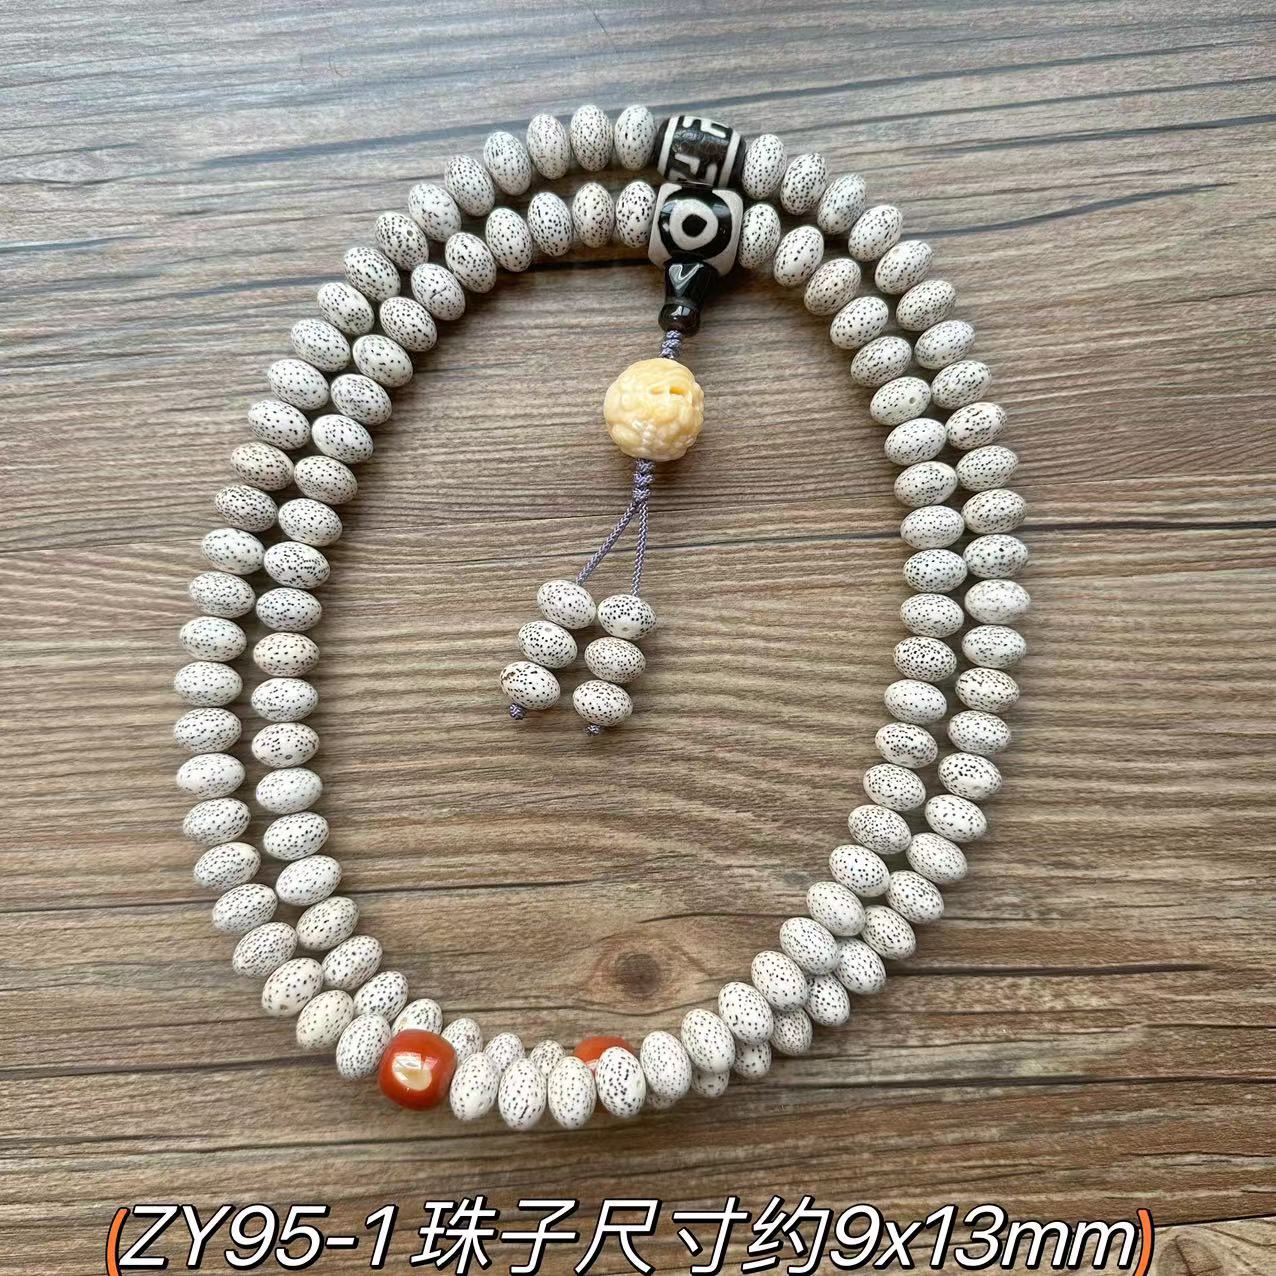 Hainan Xingyue High Throw Natural Original Ecology Xingyue Bodhi 108 Buddha Beads Collectables-Autograph Bracelet Wholesale Accessories Finished Products